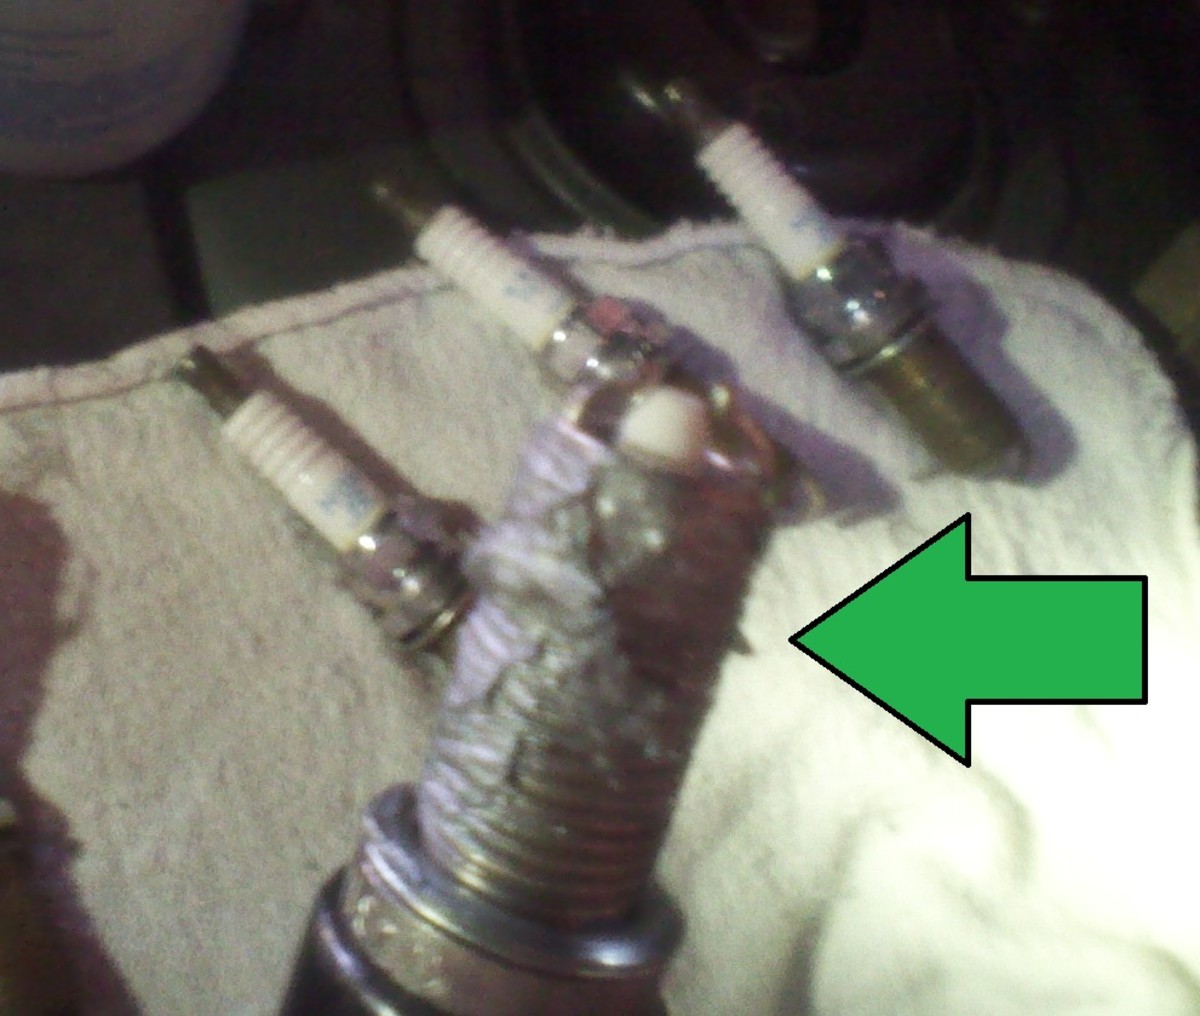 how-to-replace-the-spark-plugs-in-a-2006-nissan-altima-25-liter-step-by-step-with-pictures